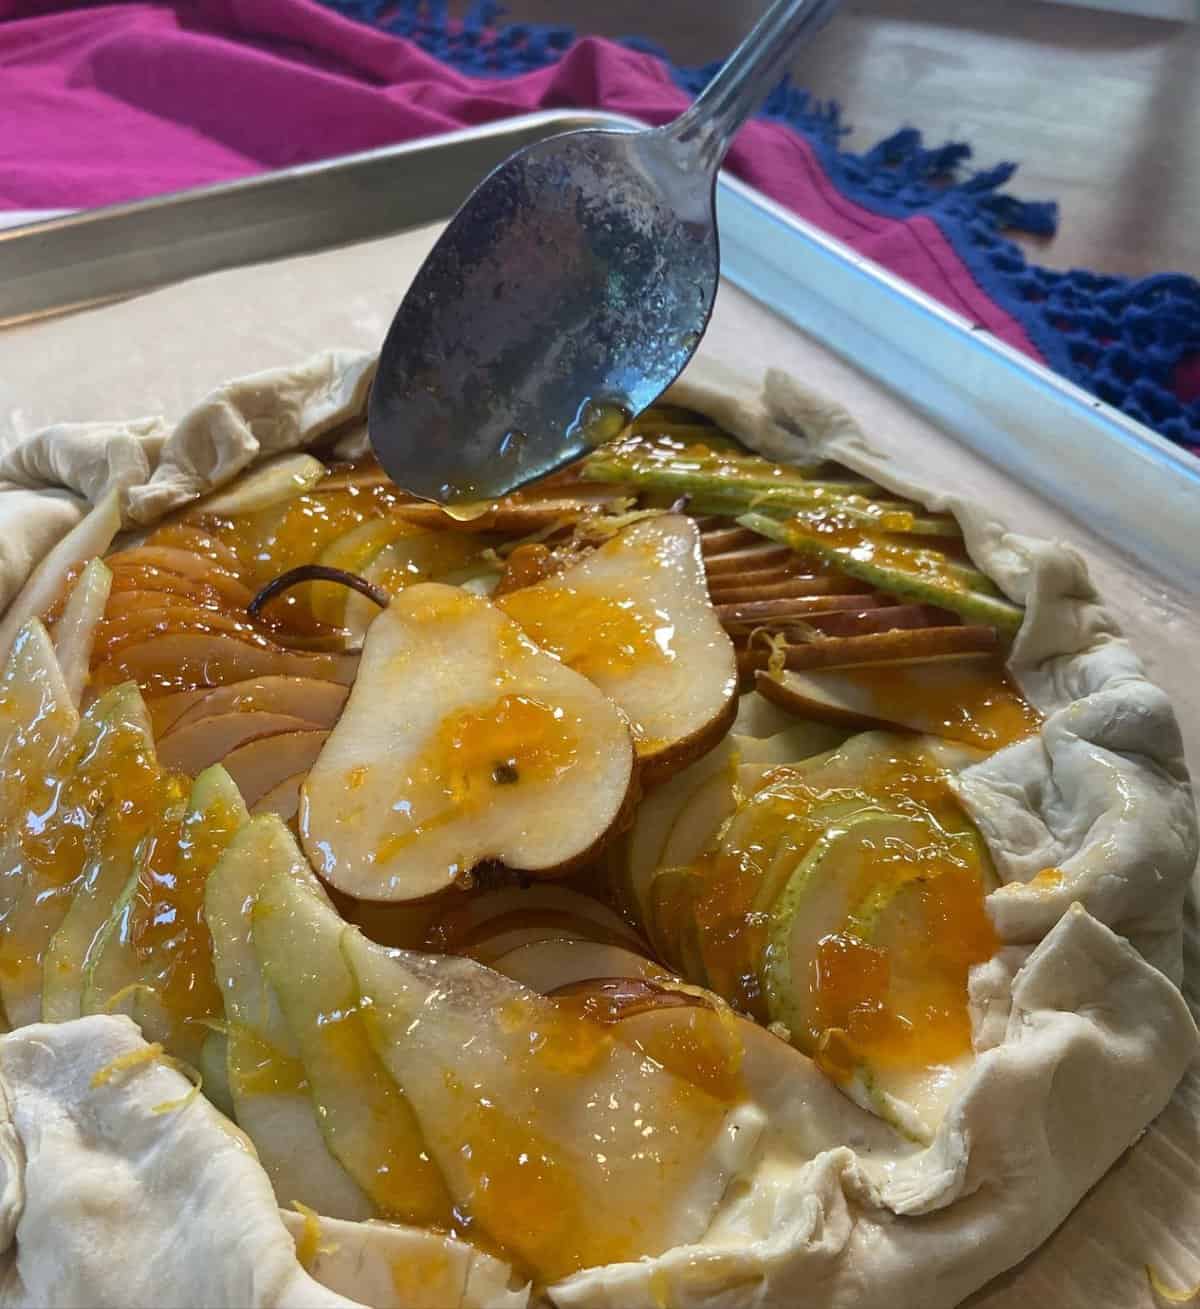 spooning apricot jam over sliced pears